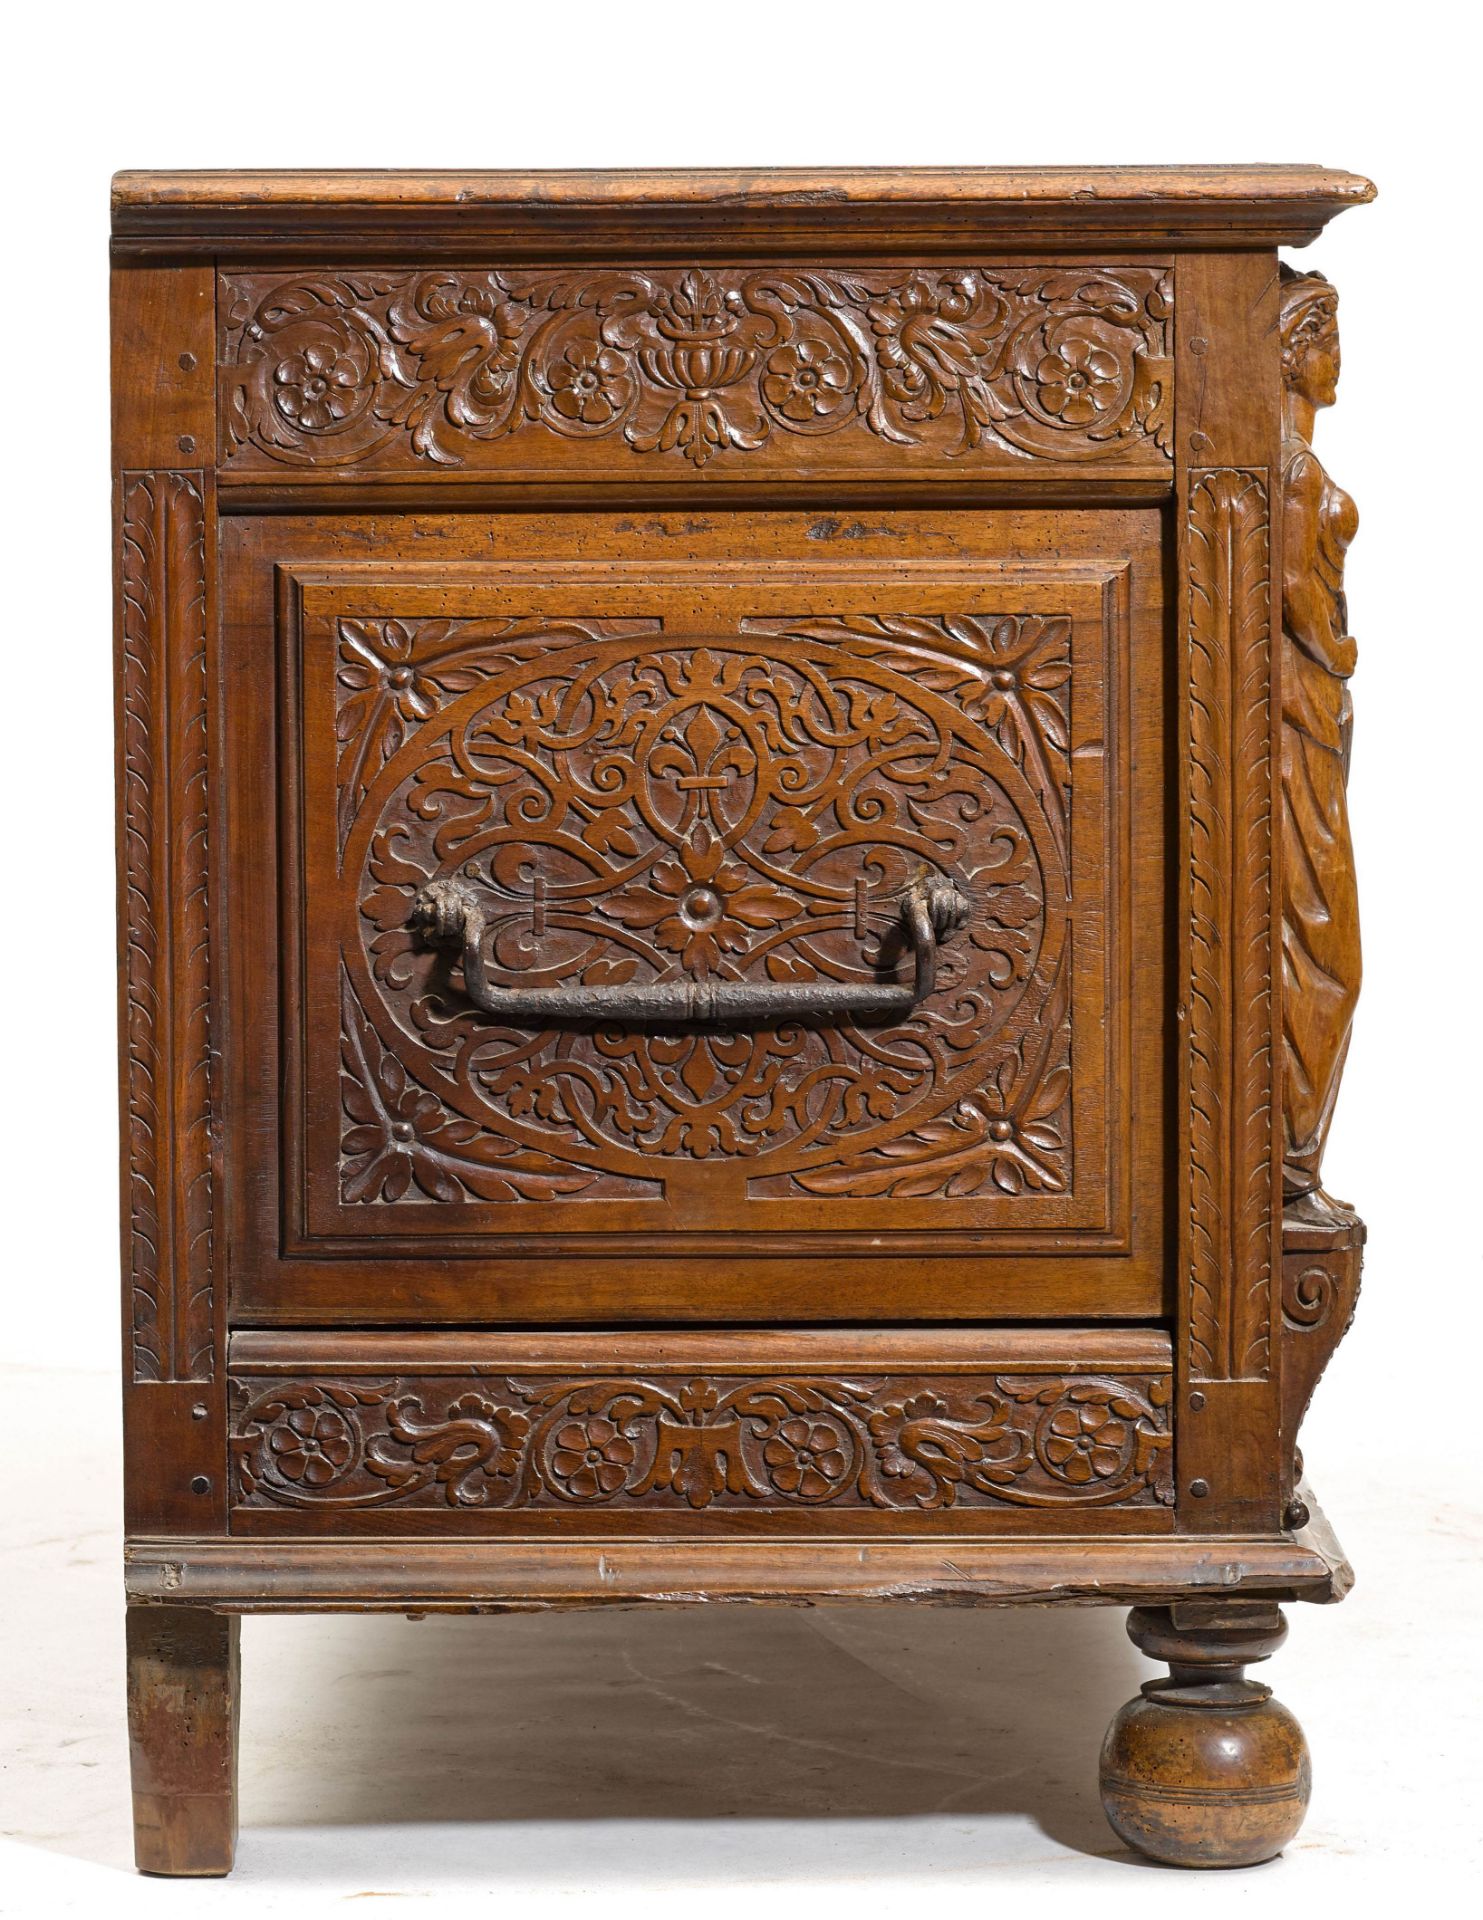 LARGE CARVED CHEST - Image 3 of 5